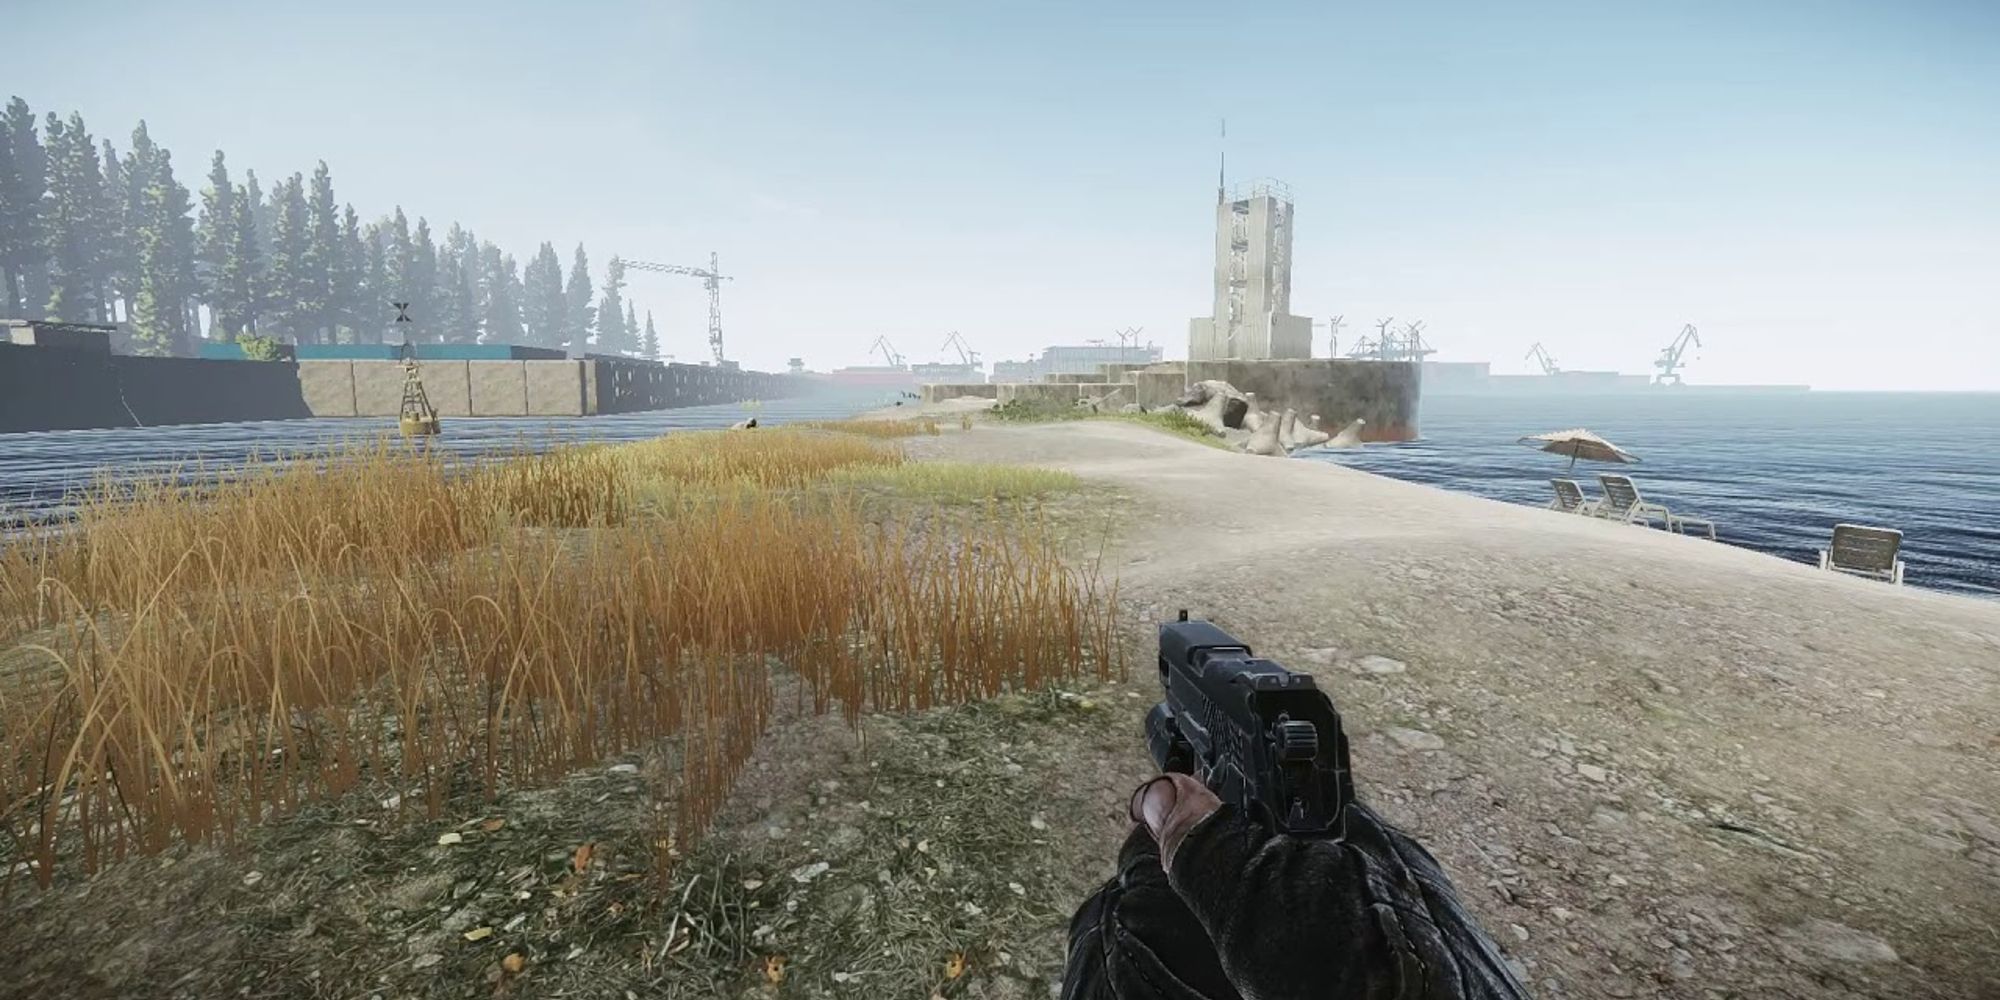 Escape From Tarkov Lighthouse Standing With Pistol On Island Overlooking Building